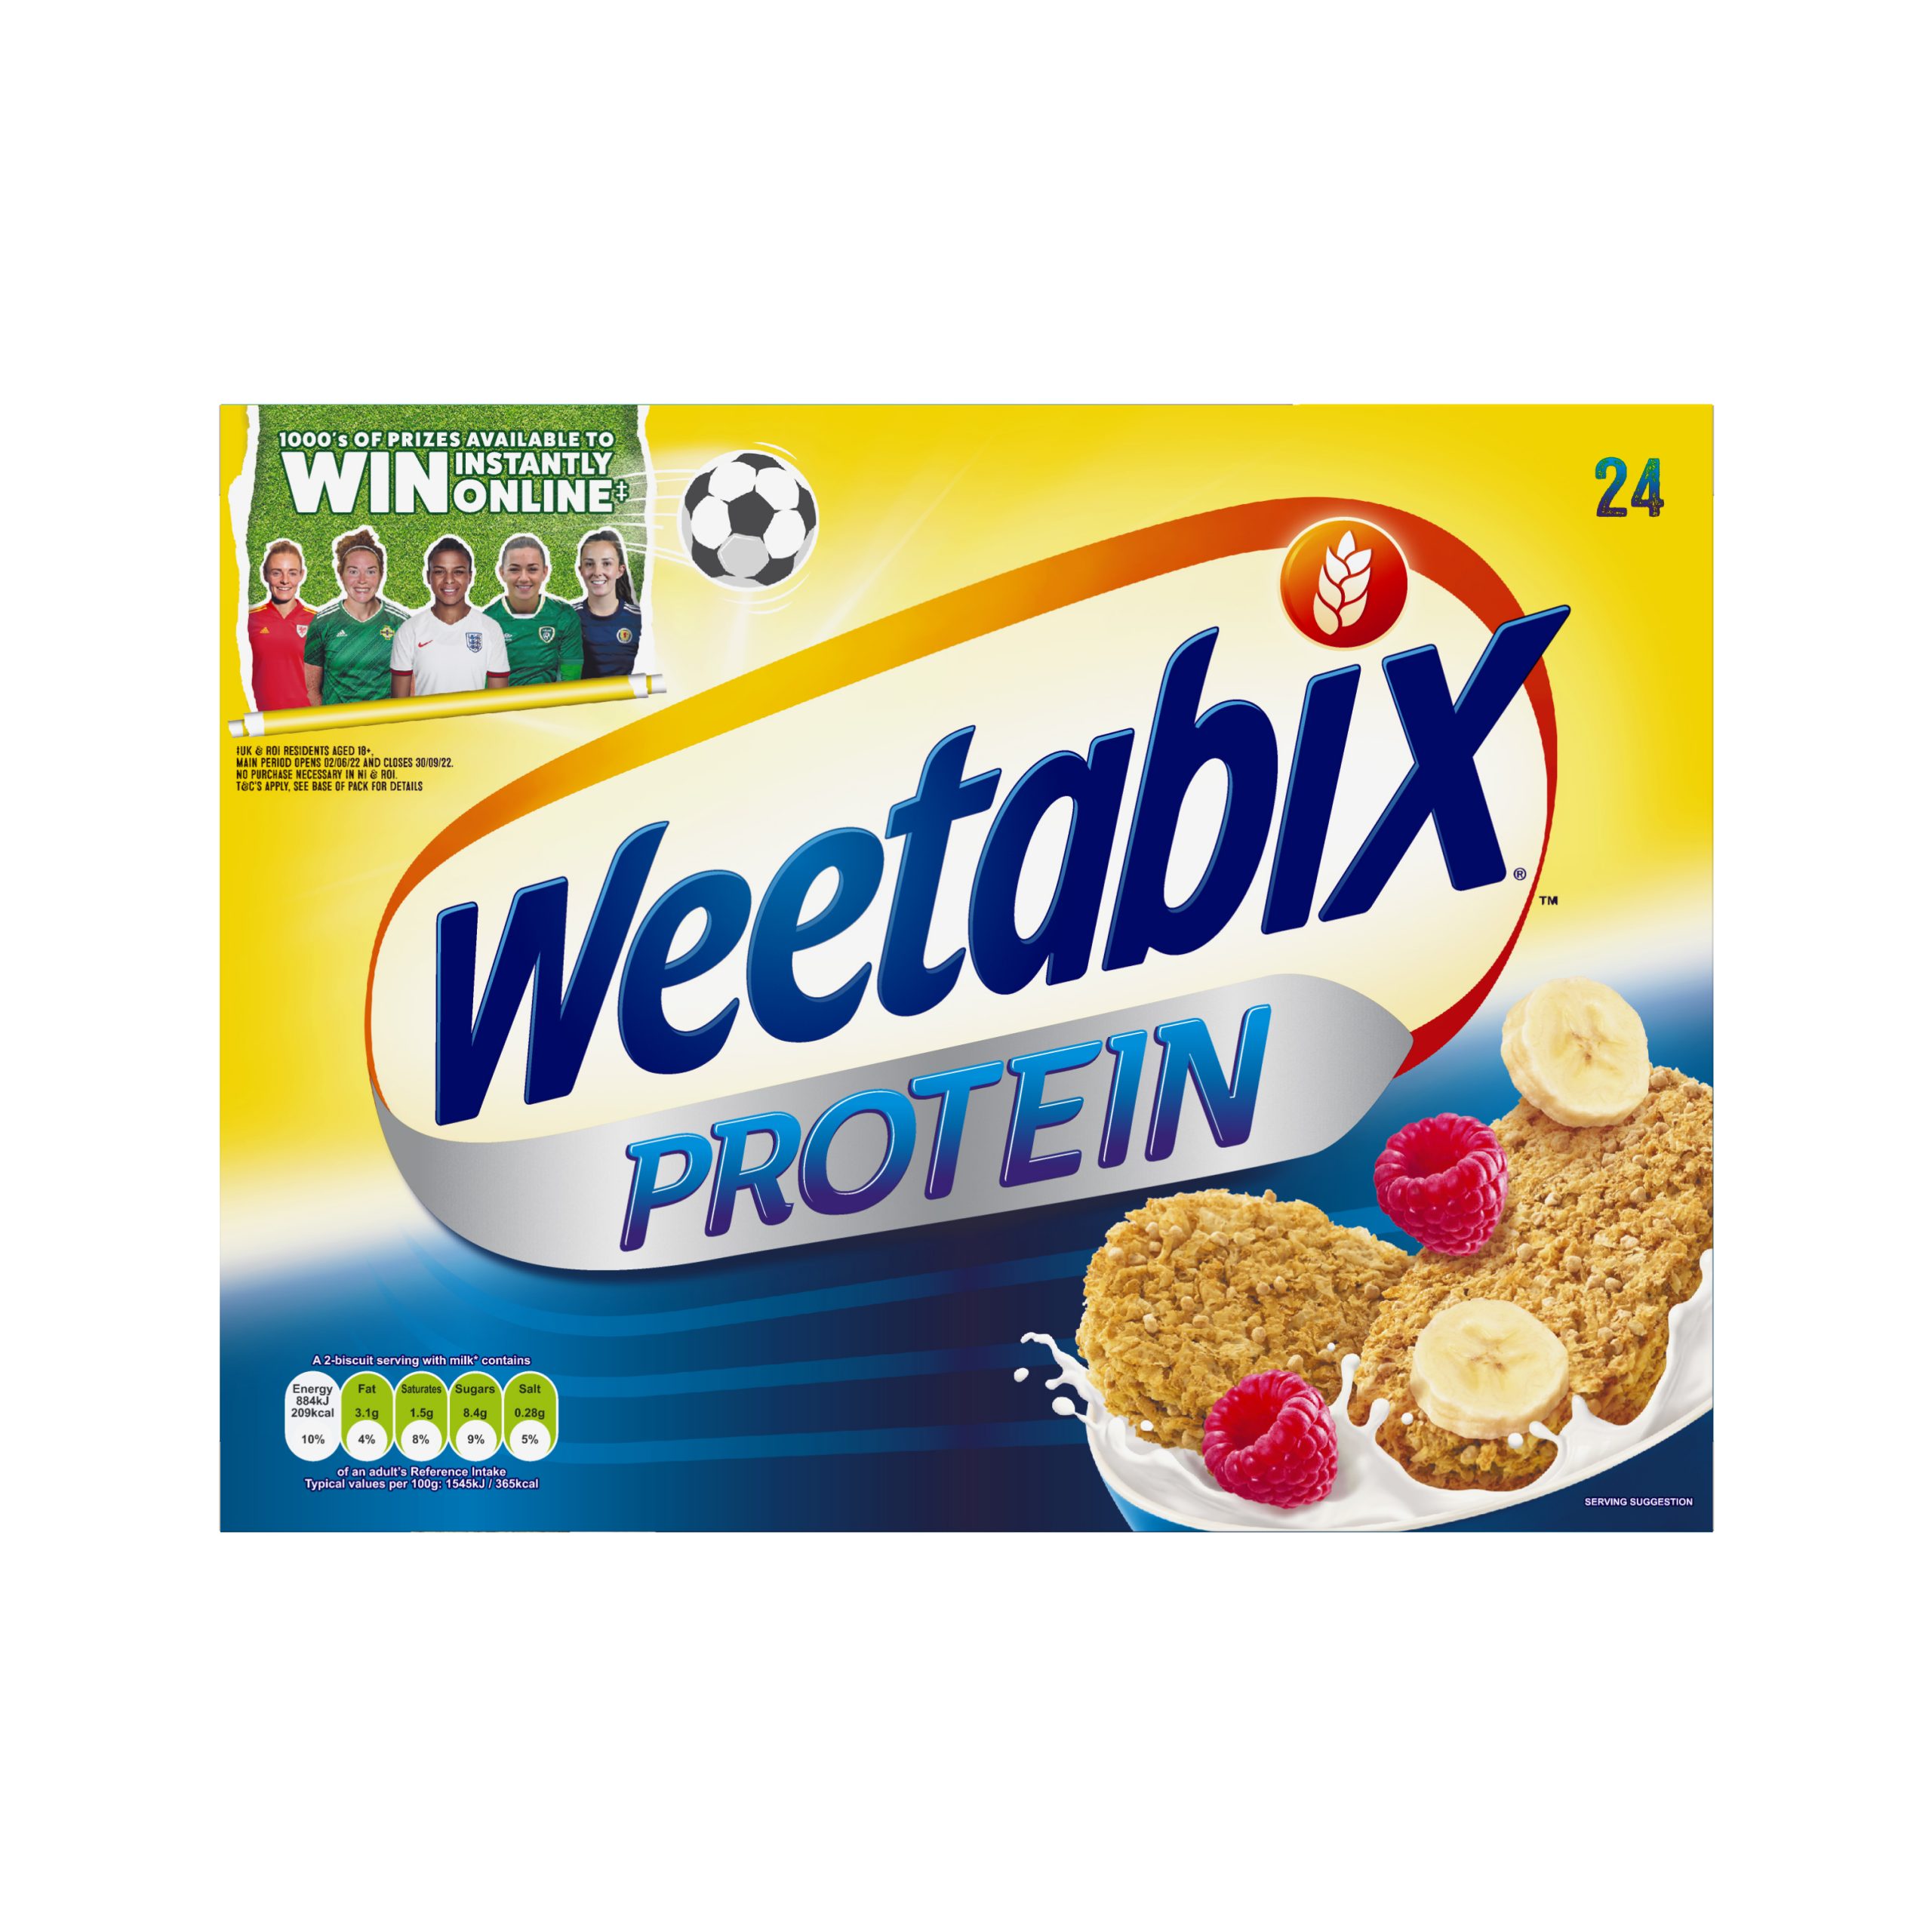 Weetabix set to score with new on-pack offer